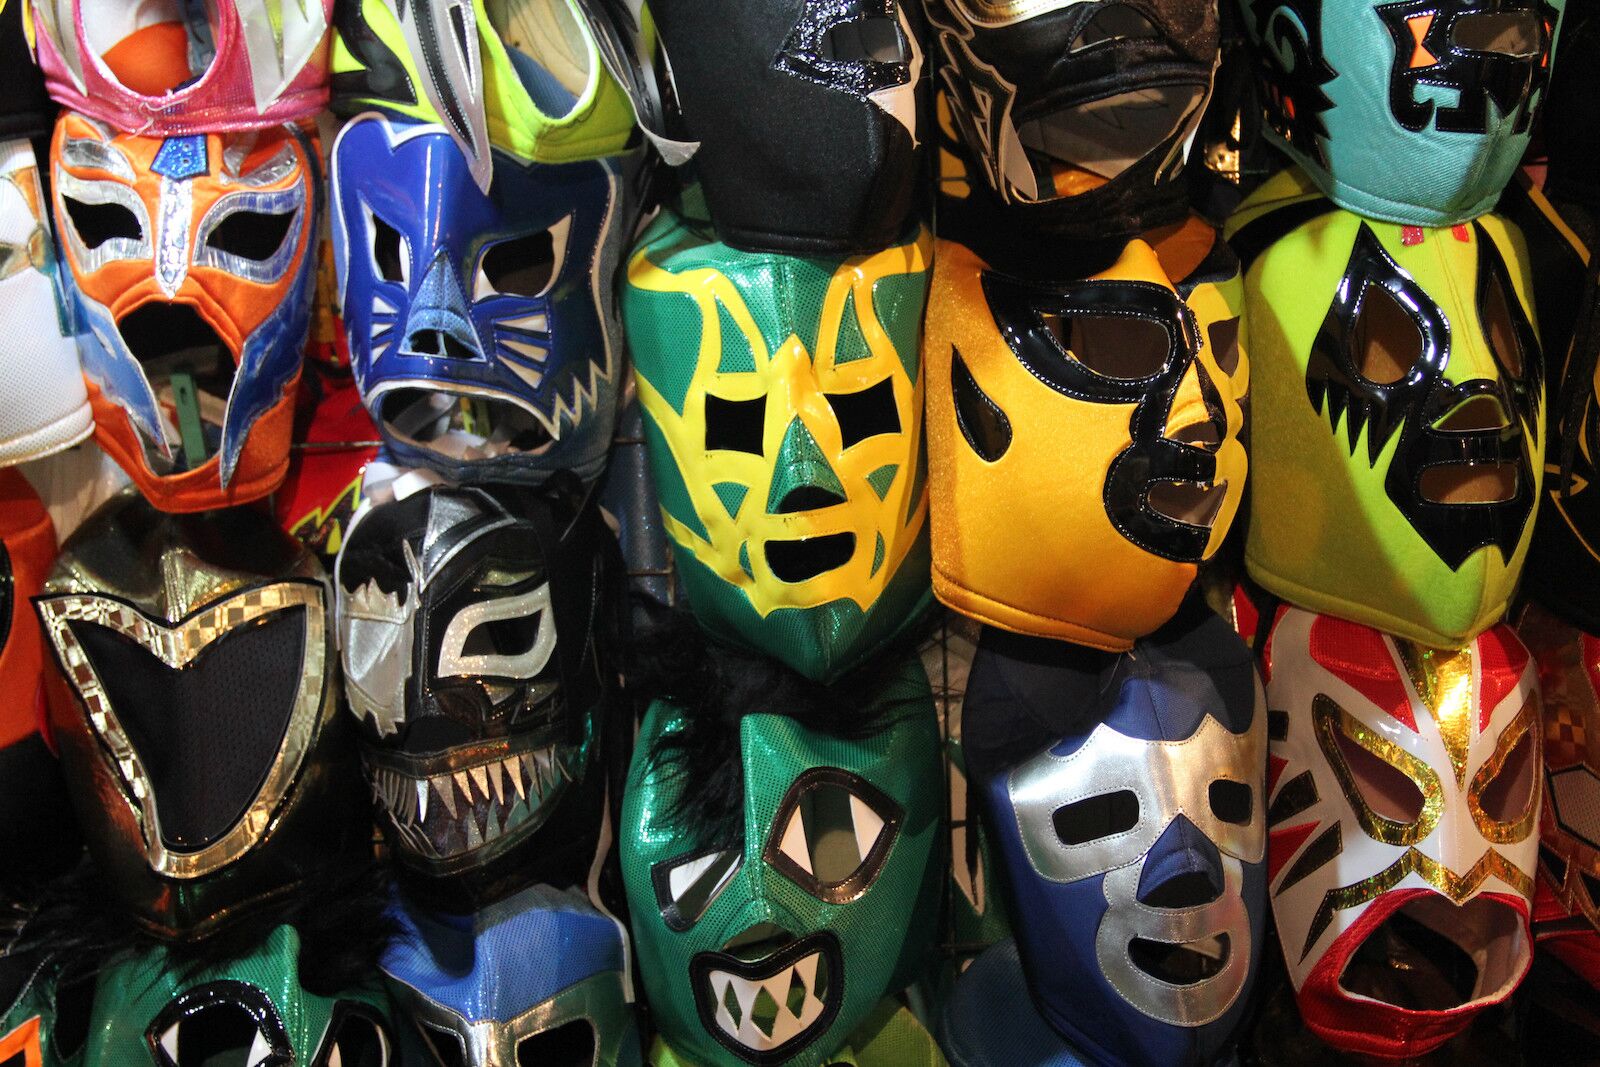 A display of colorful lucha libre masks